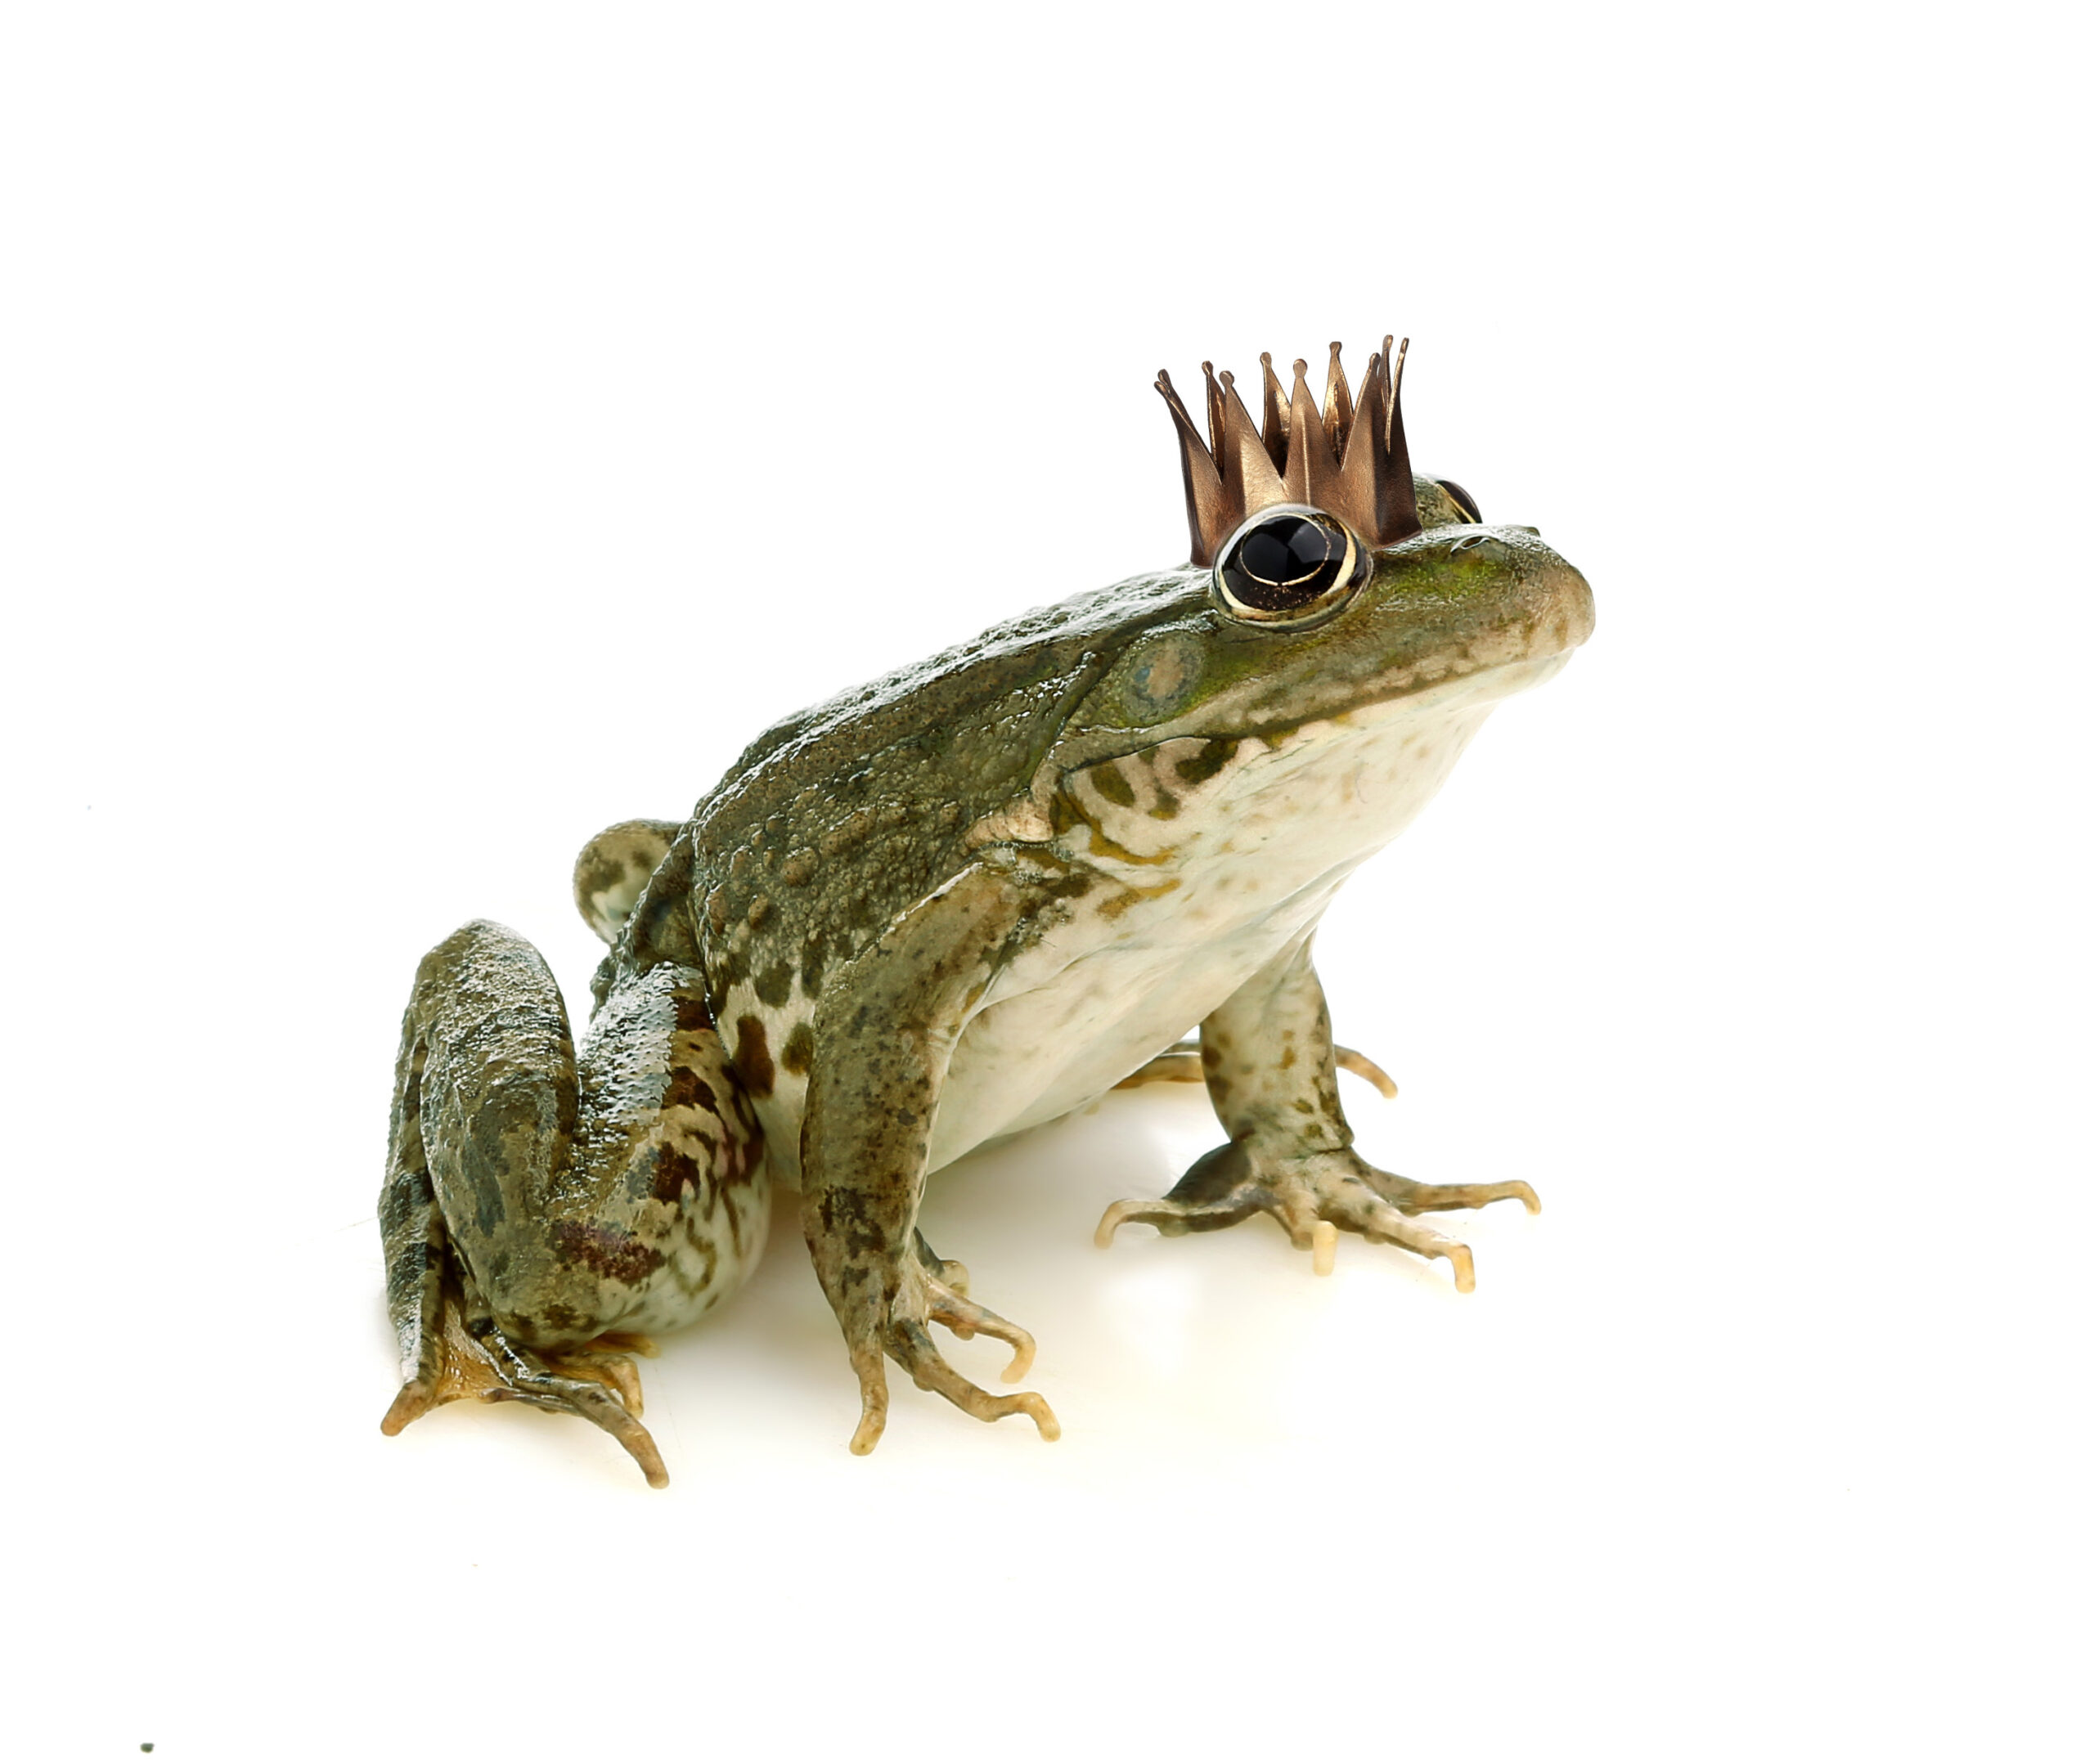 Frog,Princess,In,A,Crown,Isolated,On,A,White,Background.